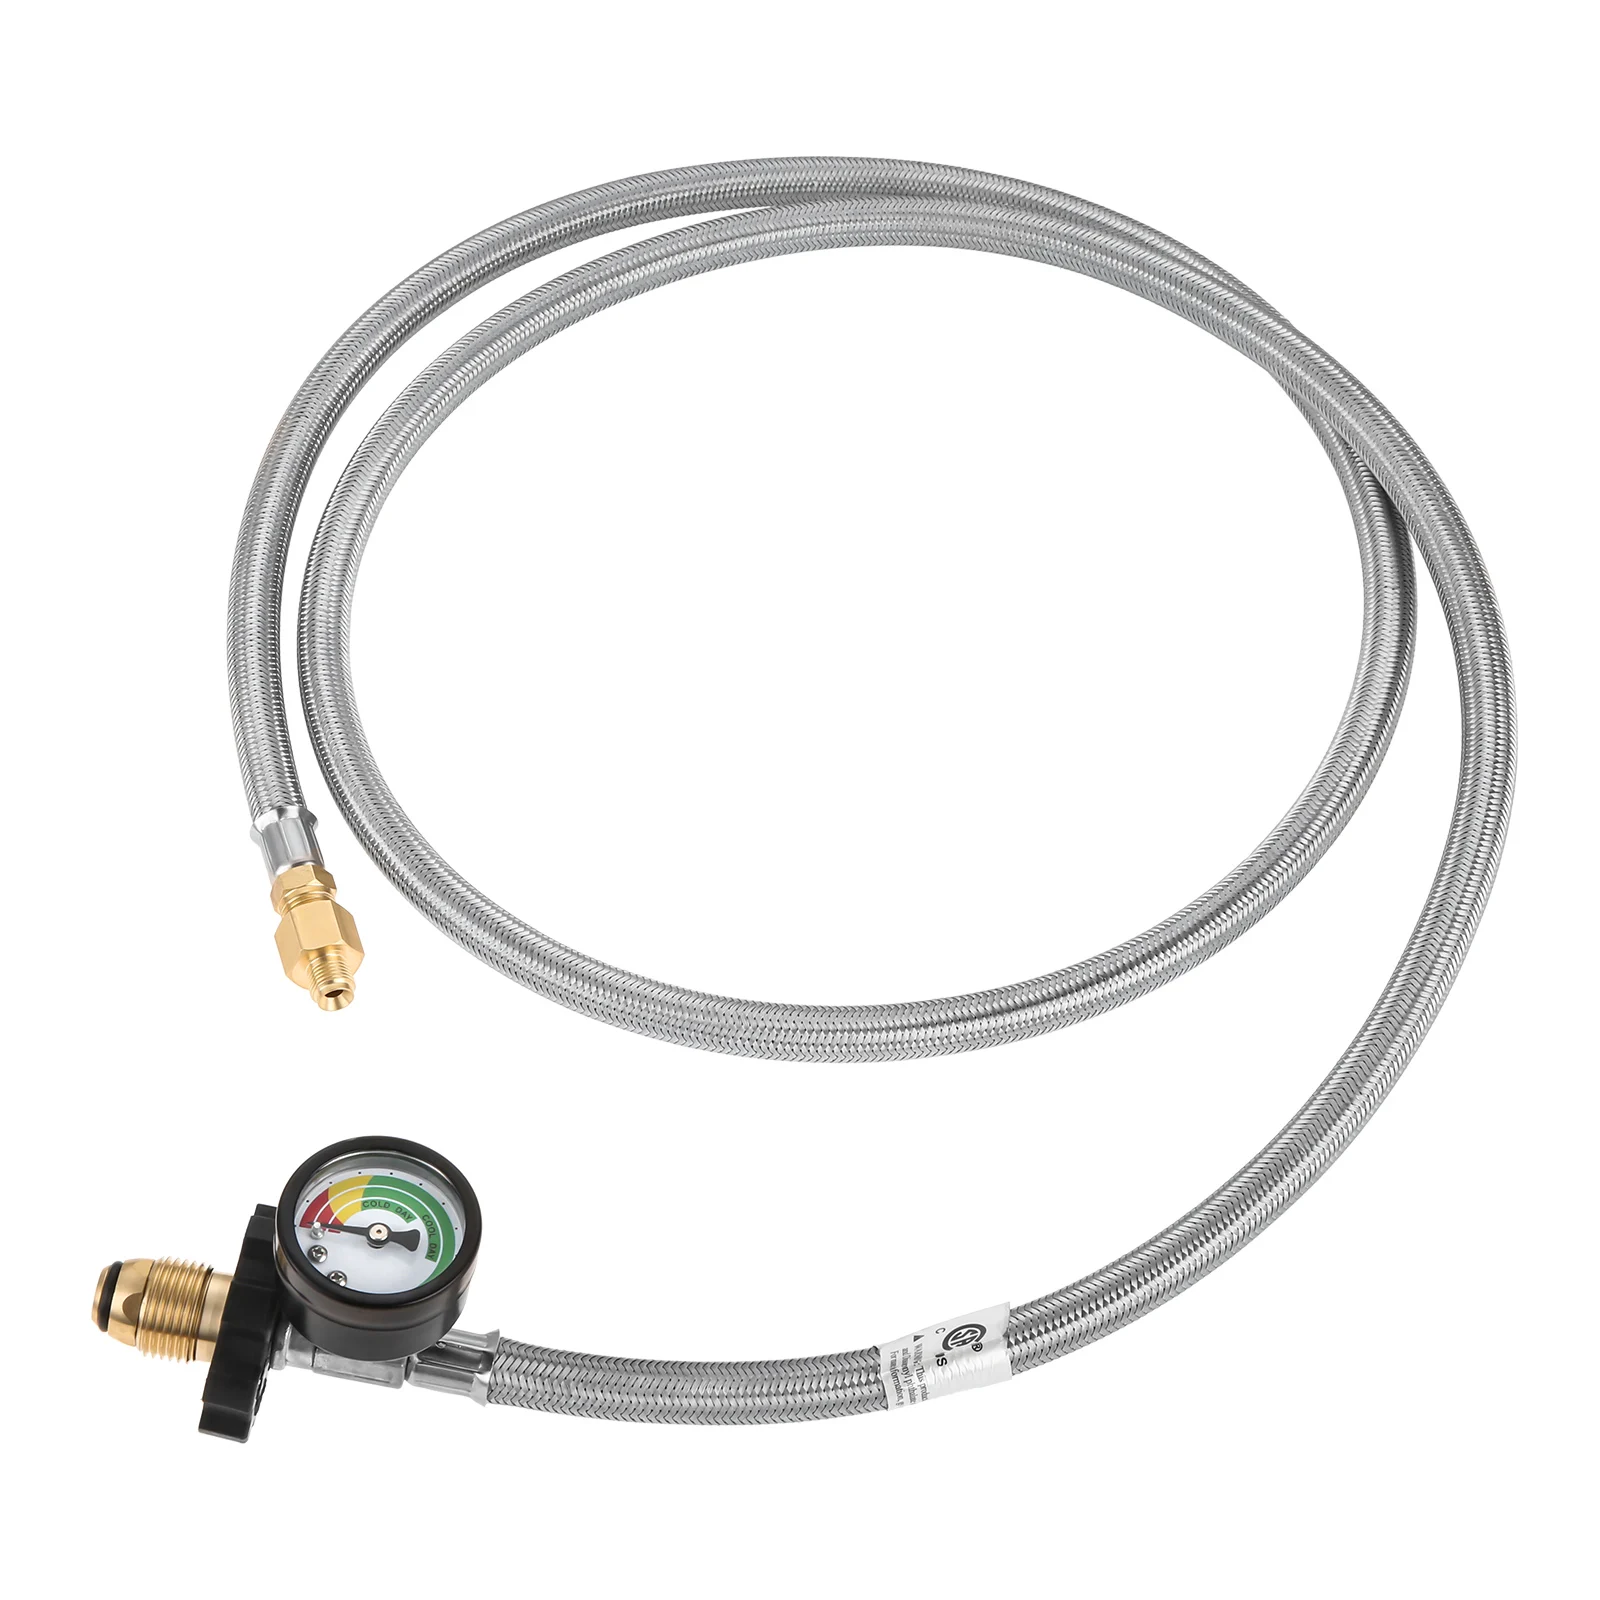 

Universal POL 1/4 inch NPT Inverted Male Flare Propane Stove Tank Pigtail Hose with Gauge for Standard Two-Stage Regulator 6FT